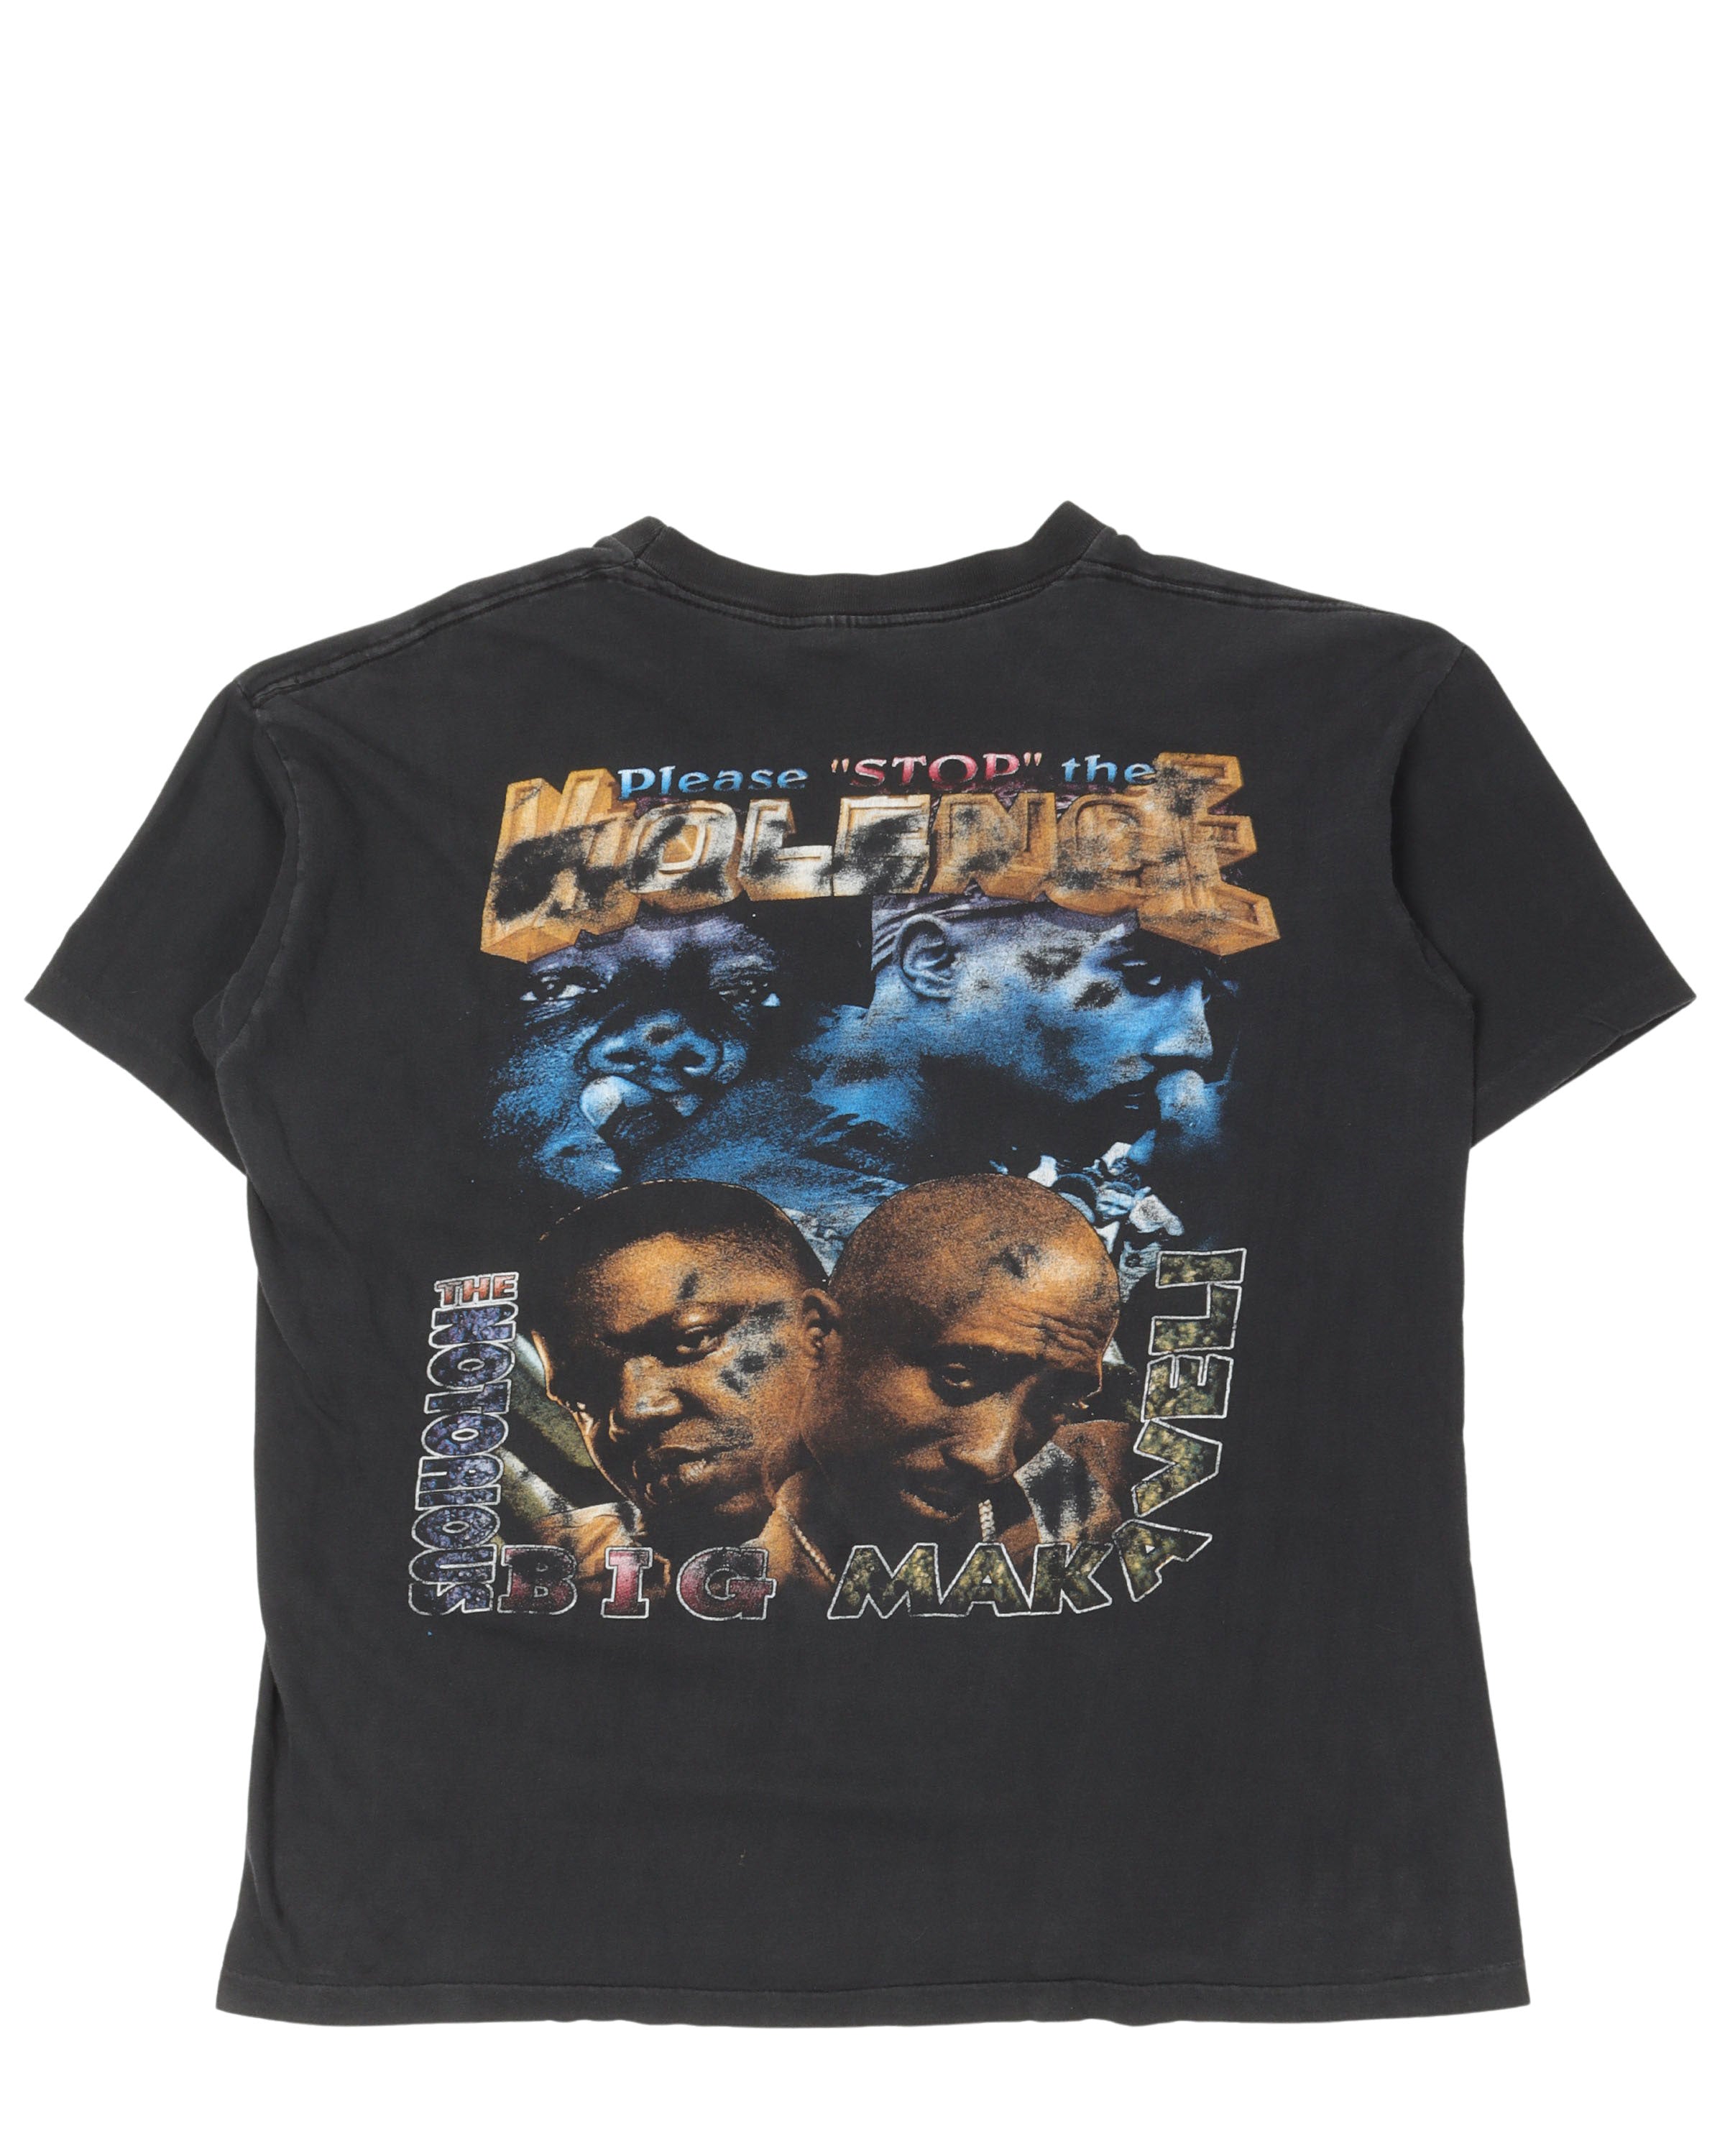 Greatly Missed Biggie and Tupac T-Shirt